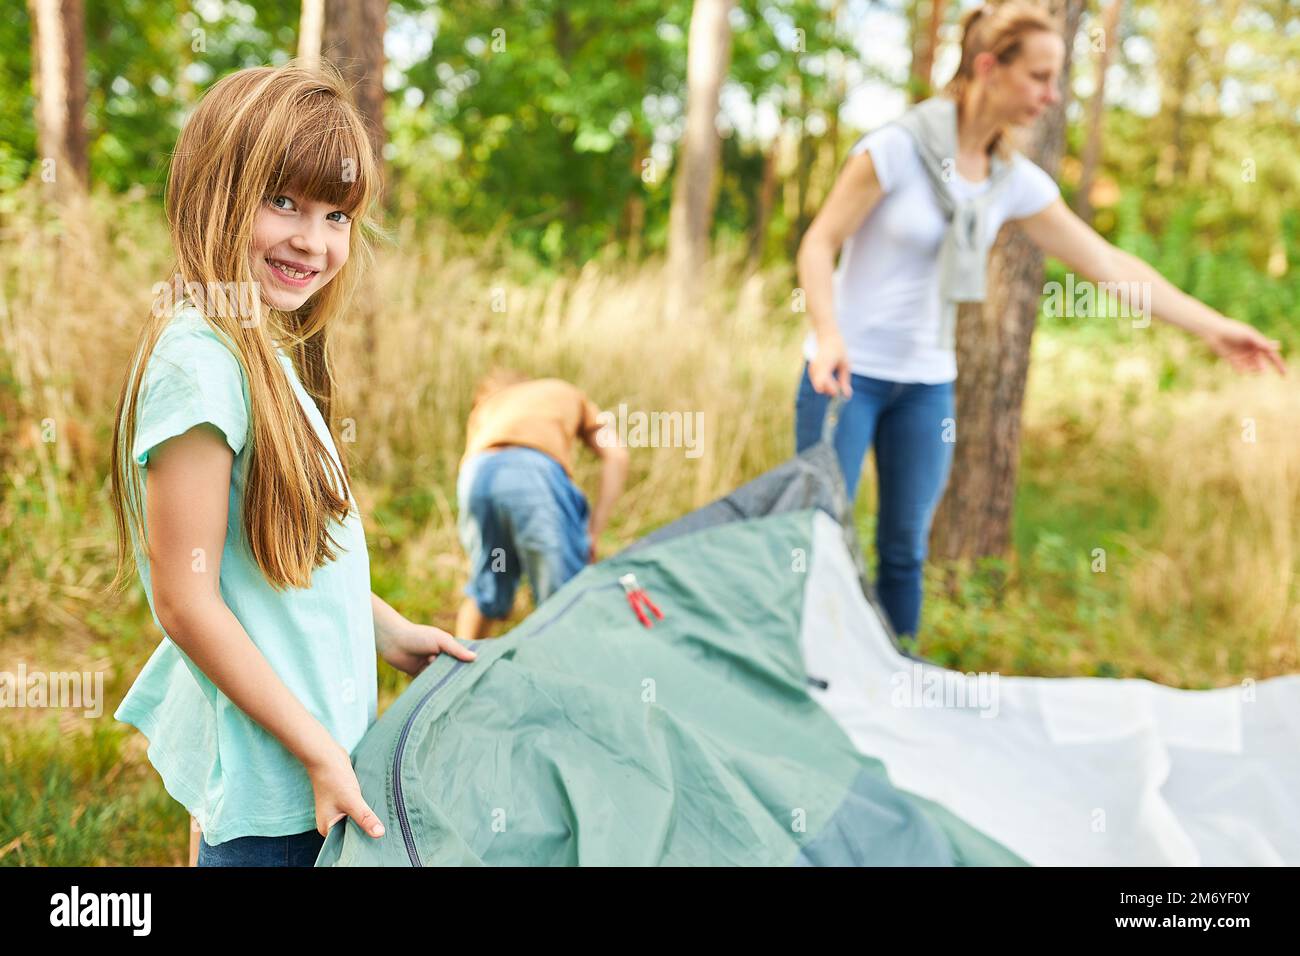 Portrait of smiling girl setting up tent for camping with family in forest during vacation Stock Photo